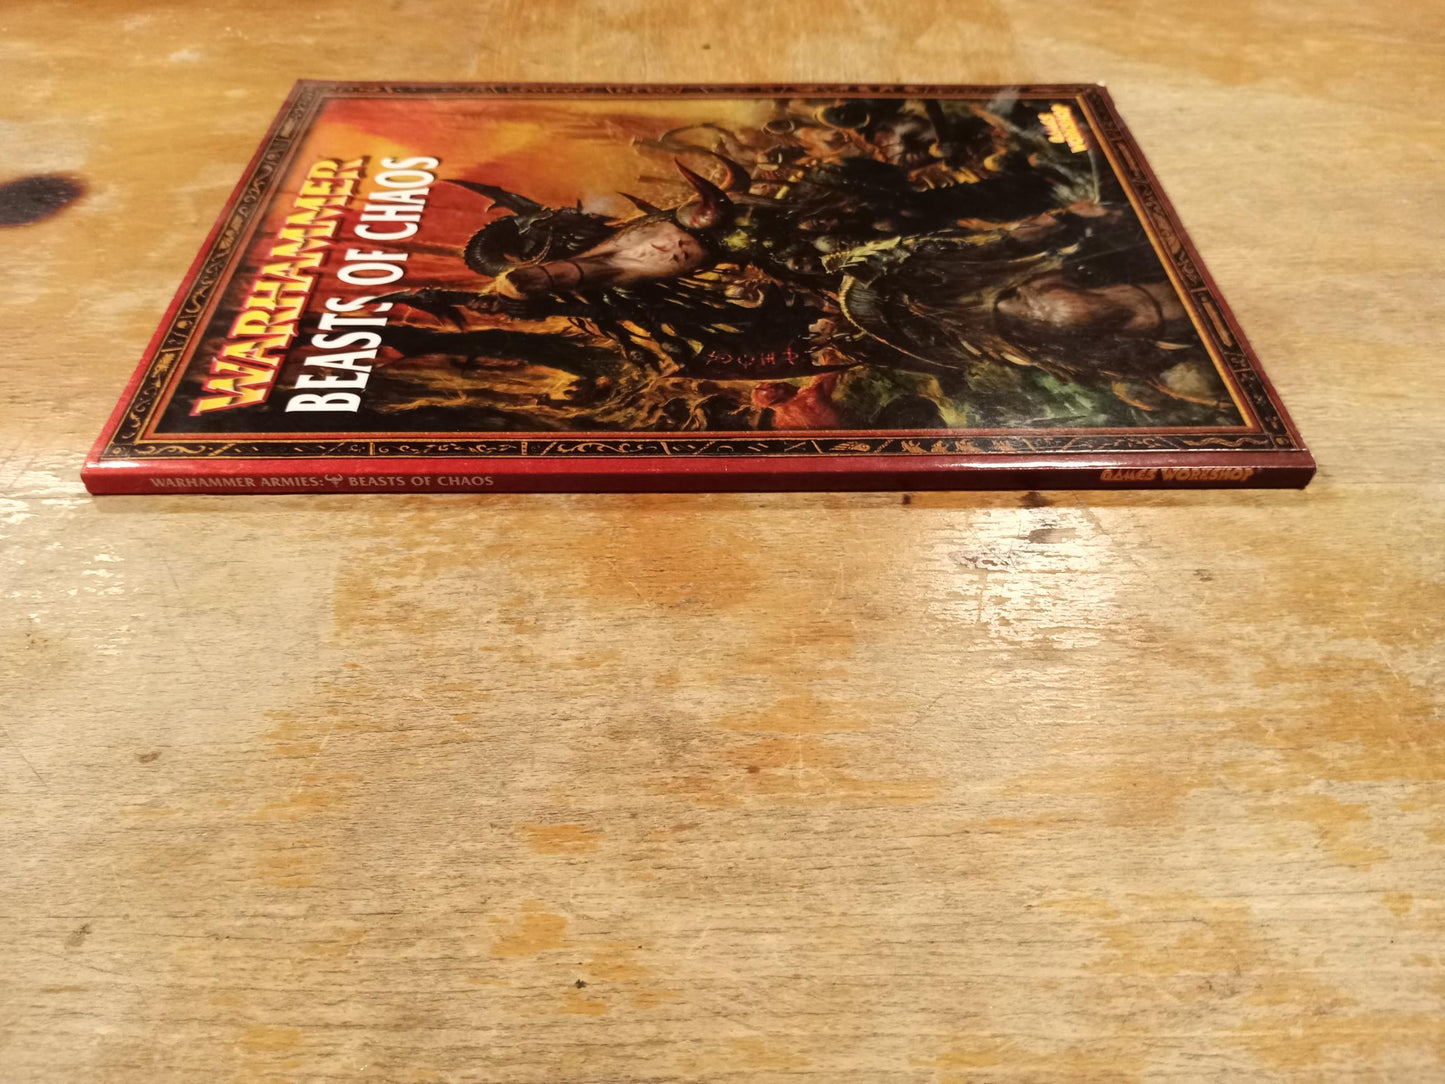 Warhammer Armies Beasts of Chaos 6th Ed Games Workshop 2003